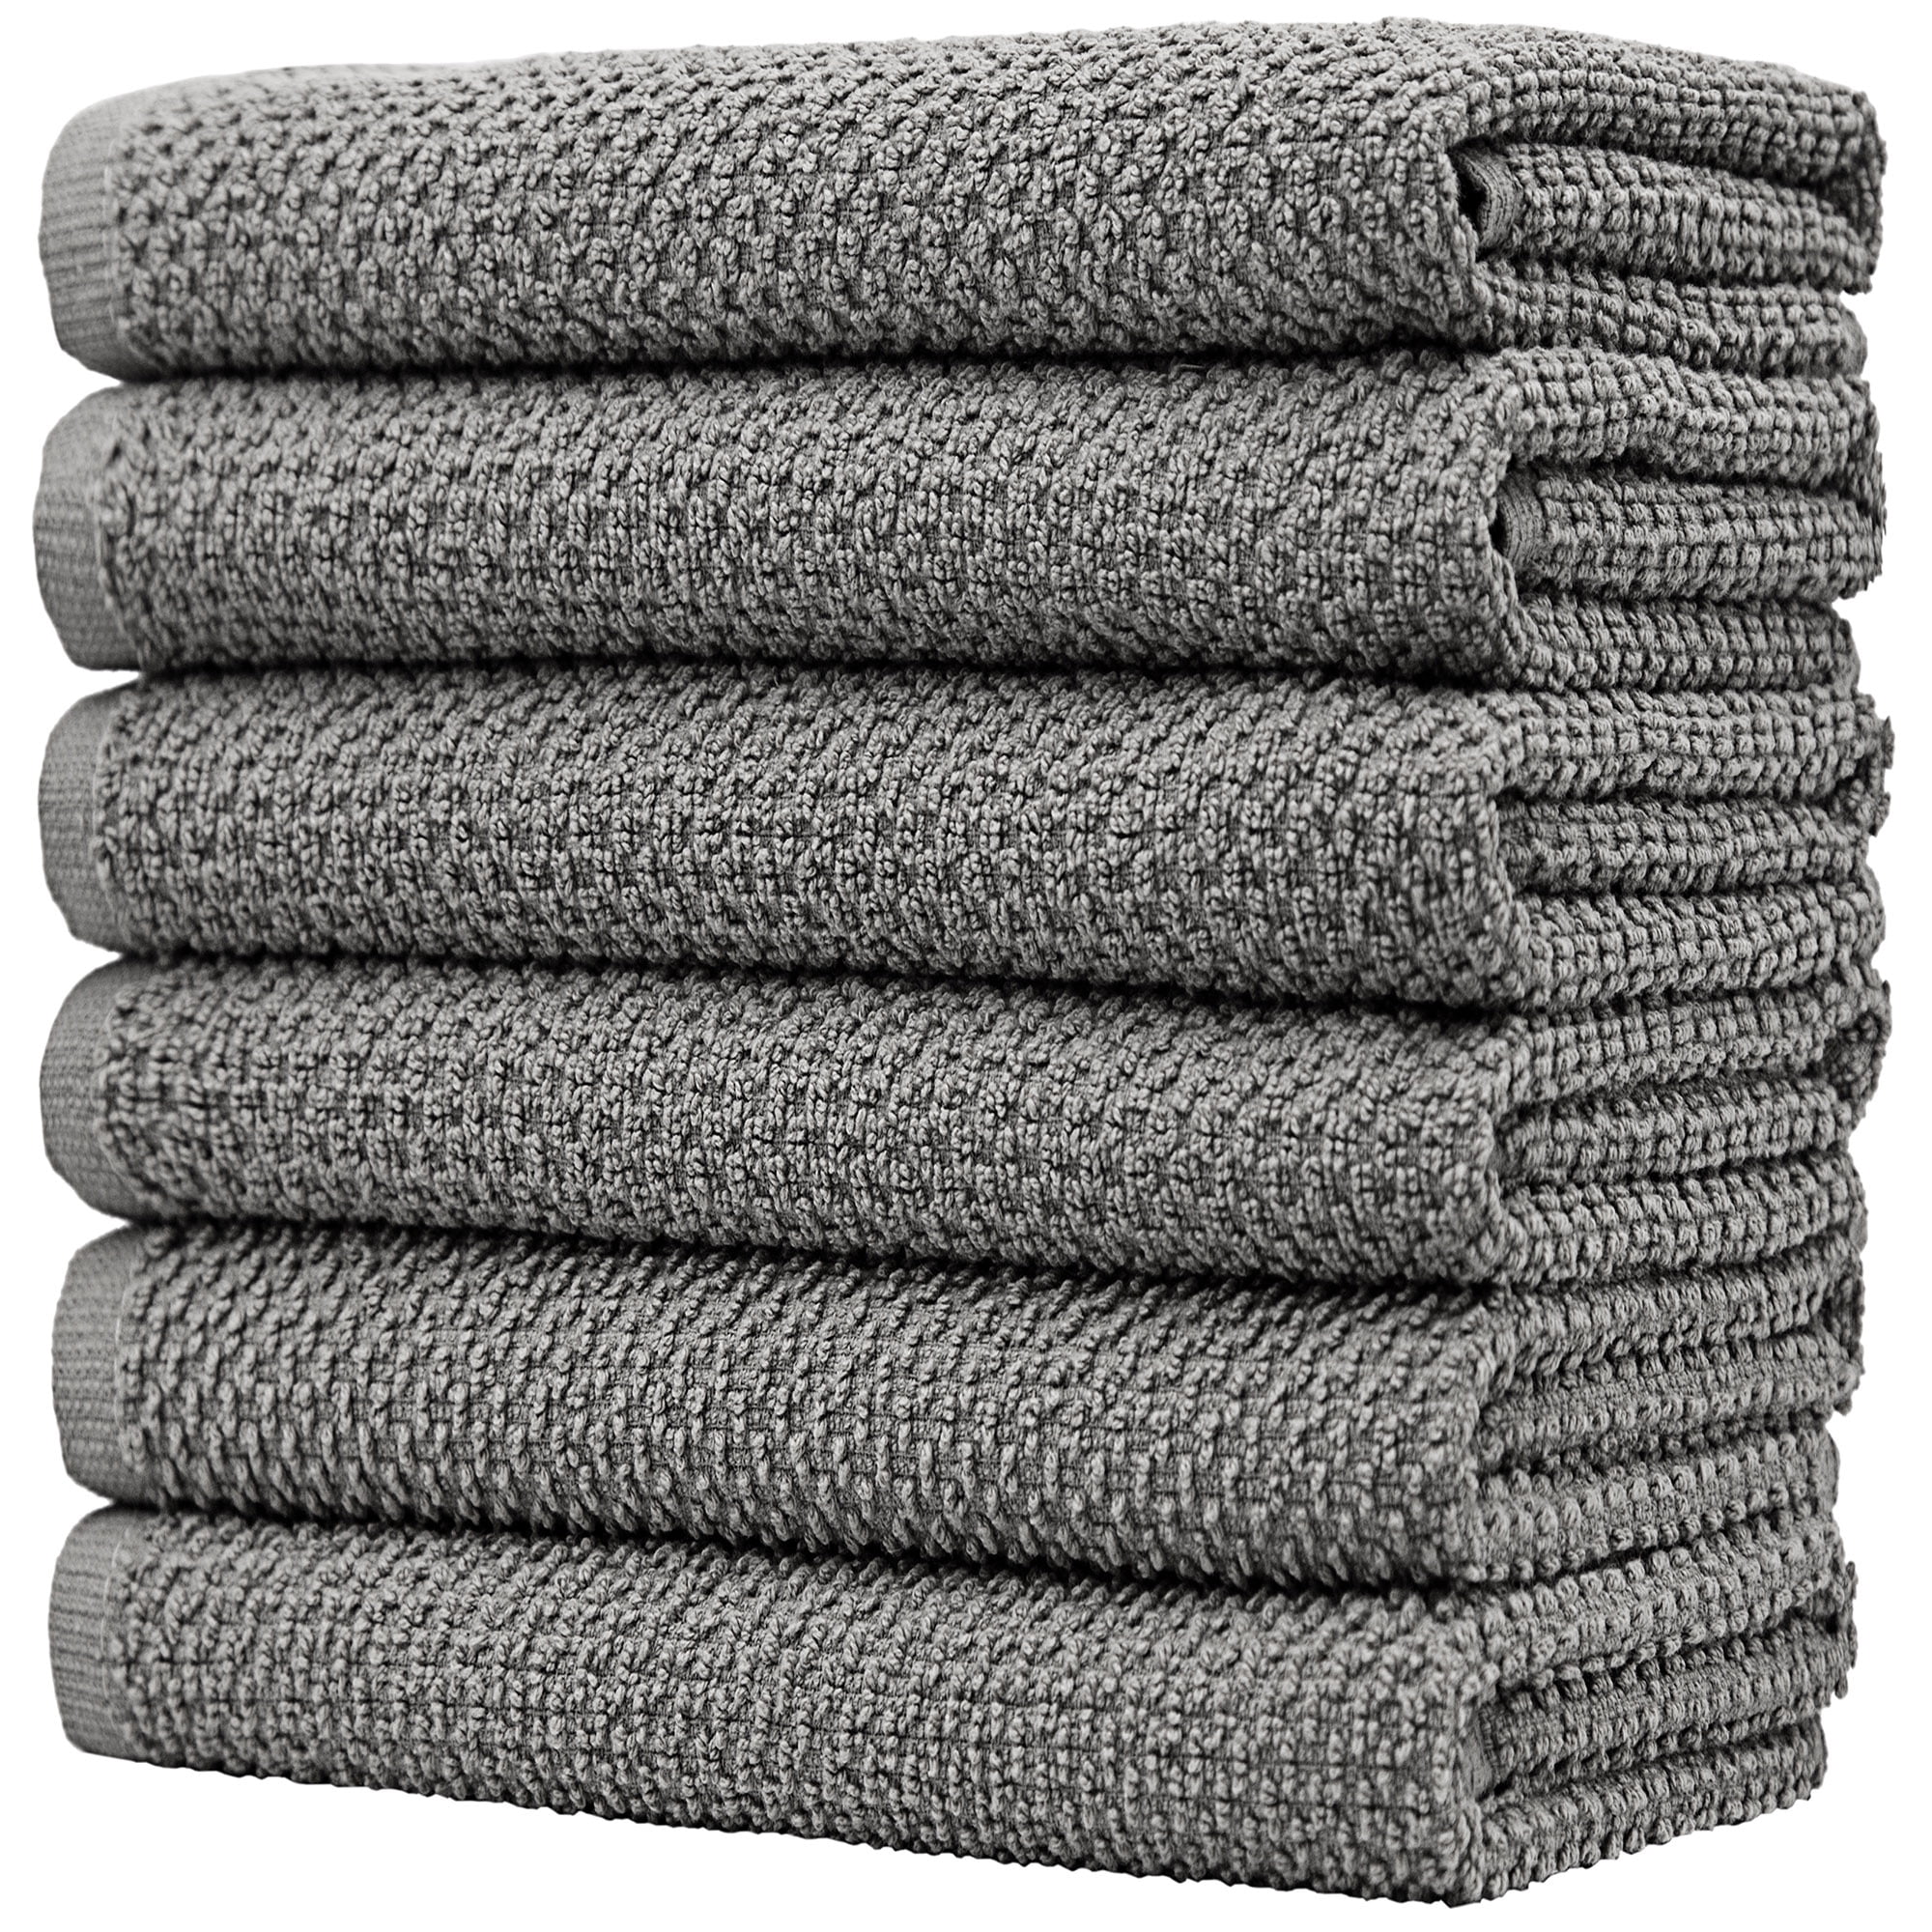 ERINA Premium Extra Large Kitchen Towels (16 x 28 Inch) - Popcorn Weave (12  Pack) Dish Towel Set 100% Combed Cotton Towels, Soft and Absorbent Tea